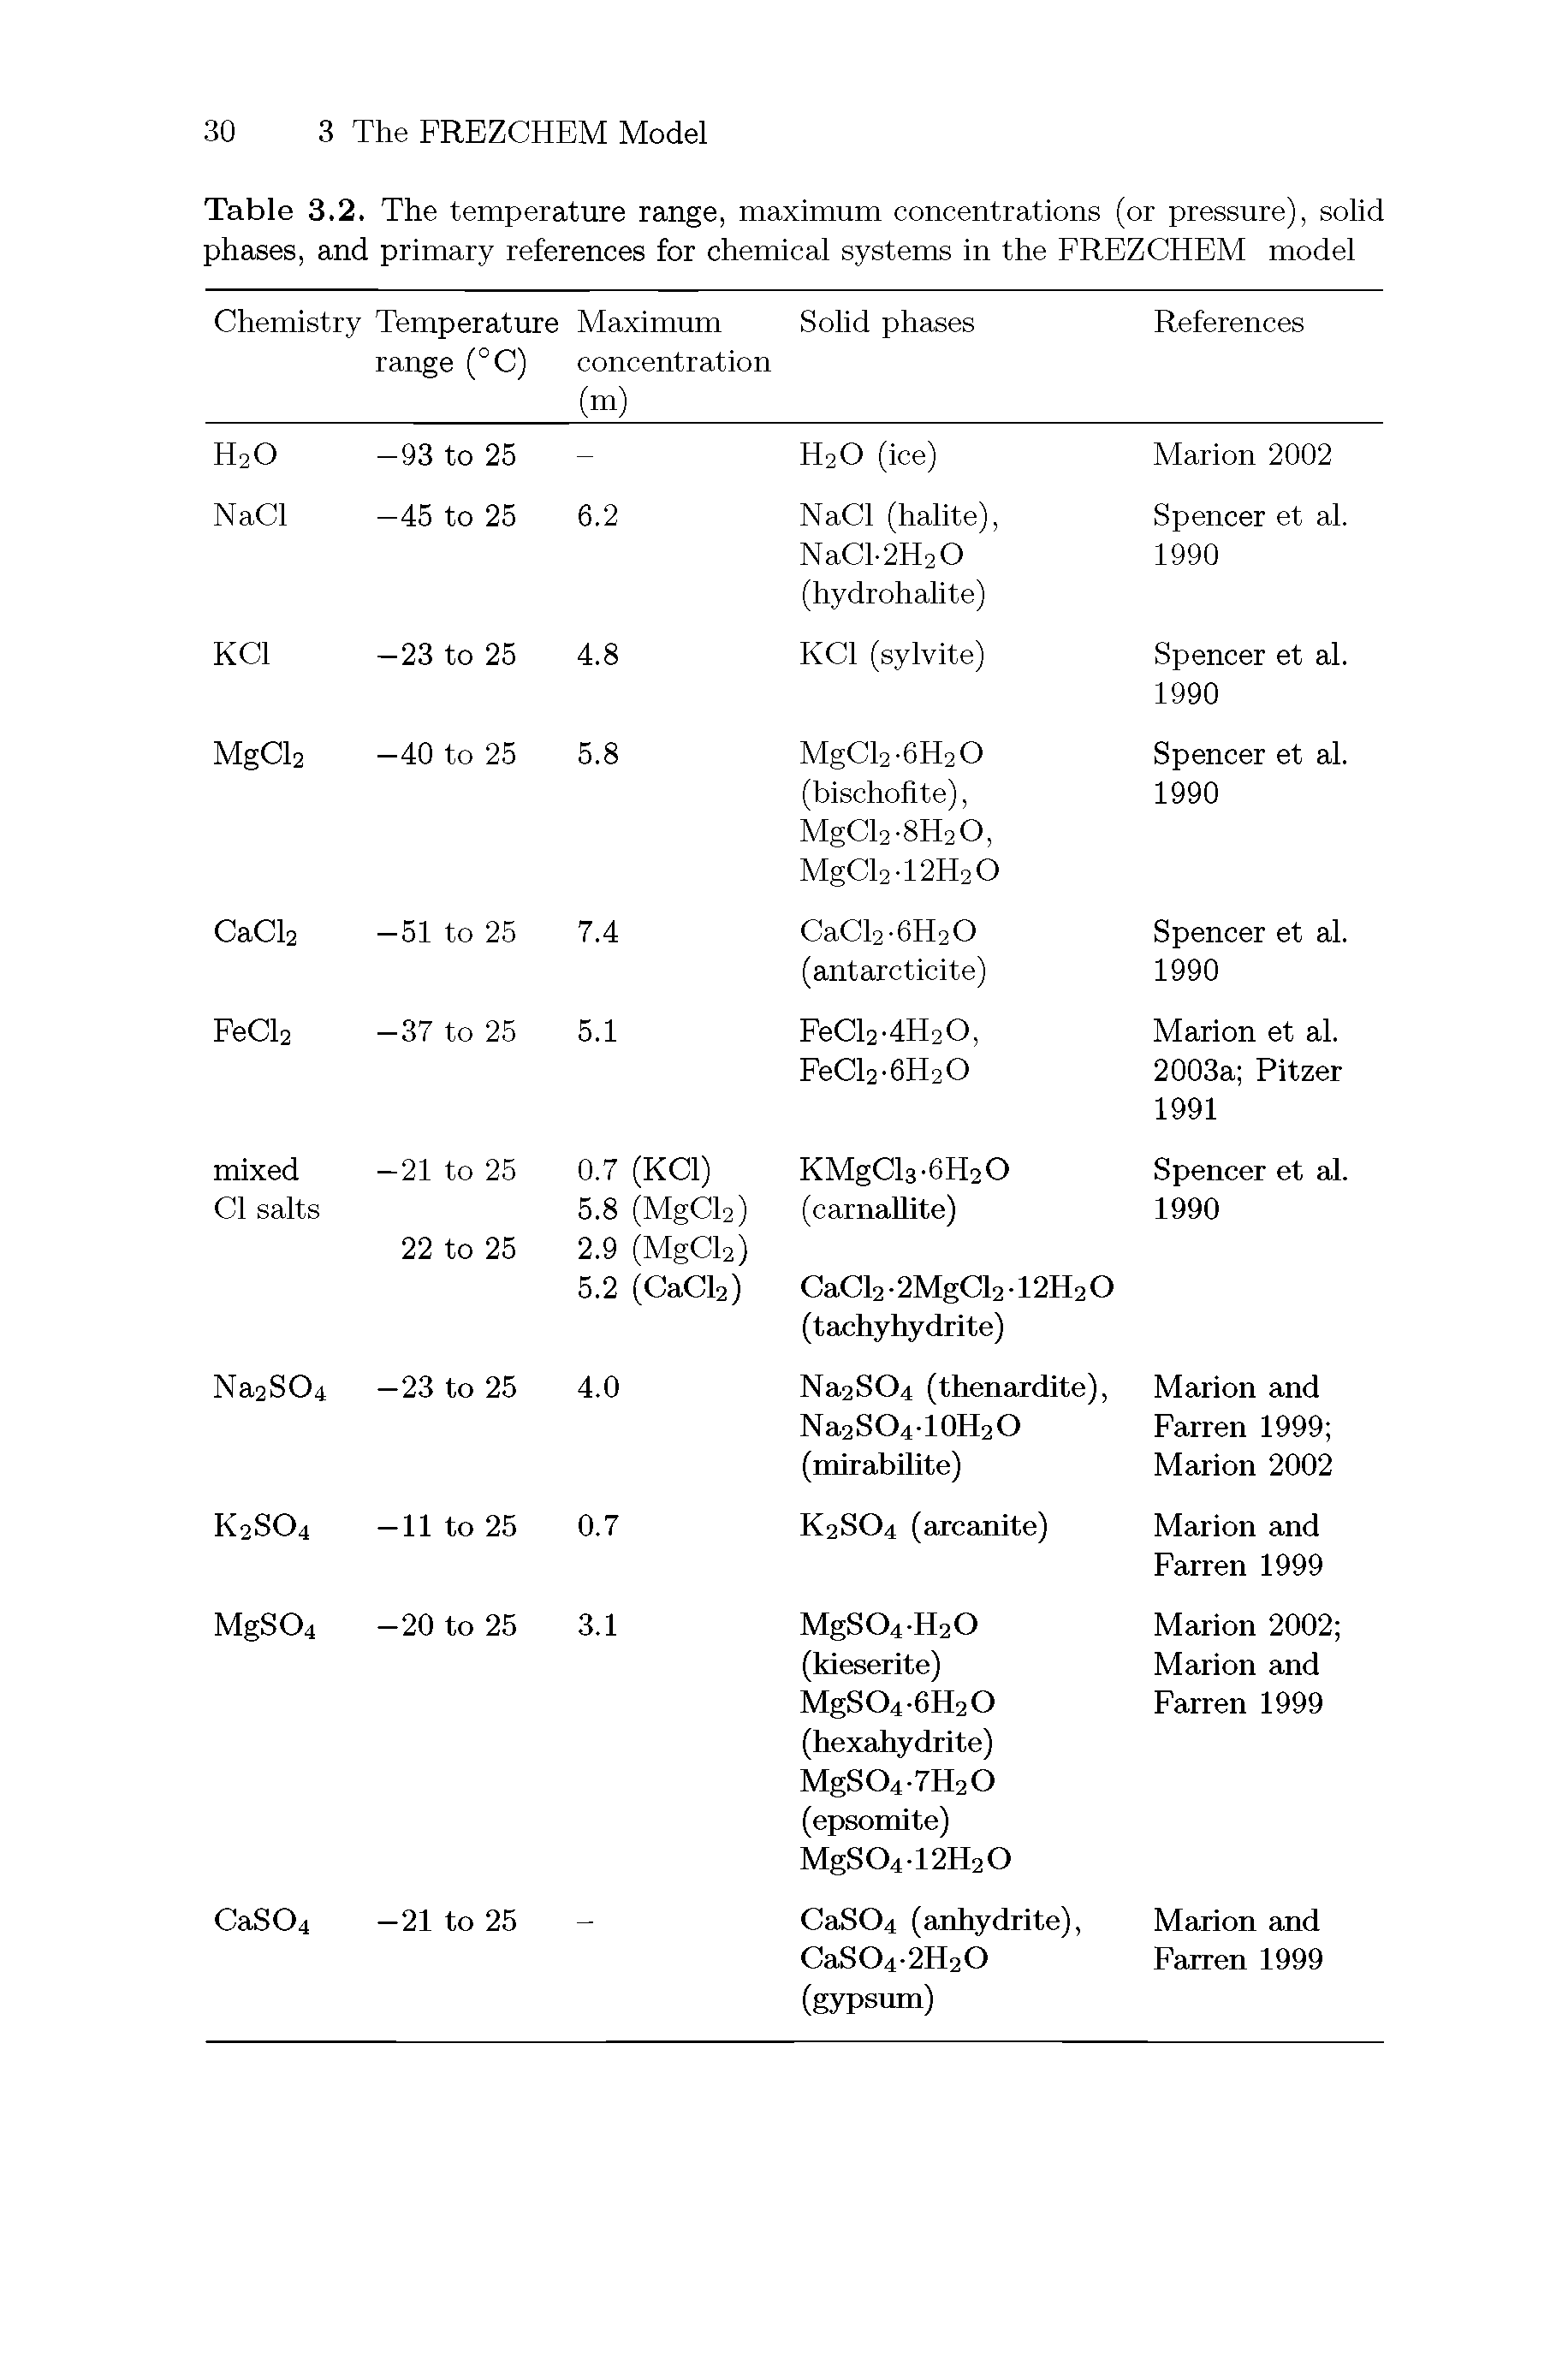 Table 3.2. The temperature range, maximum concentrations (or pressure), solid phases, and primary references for chemical systems in the FREZCHEM model...